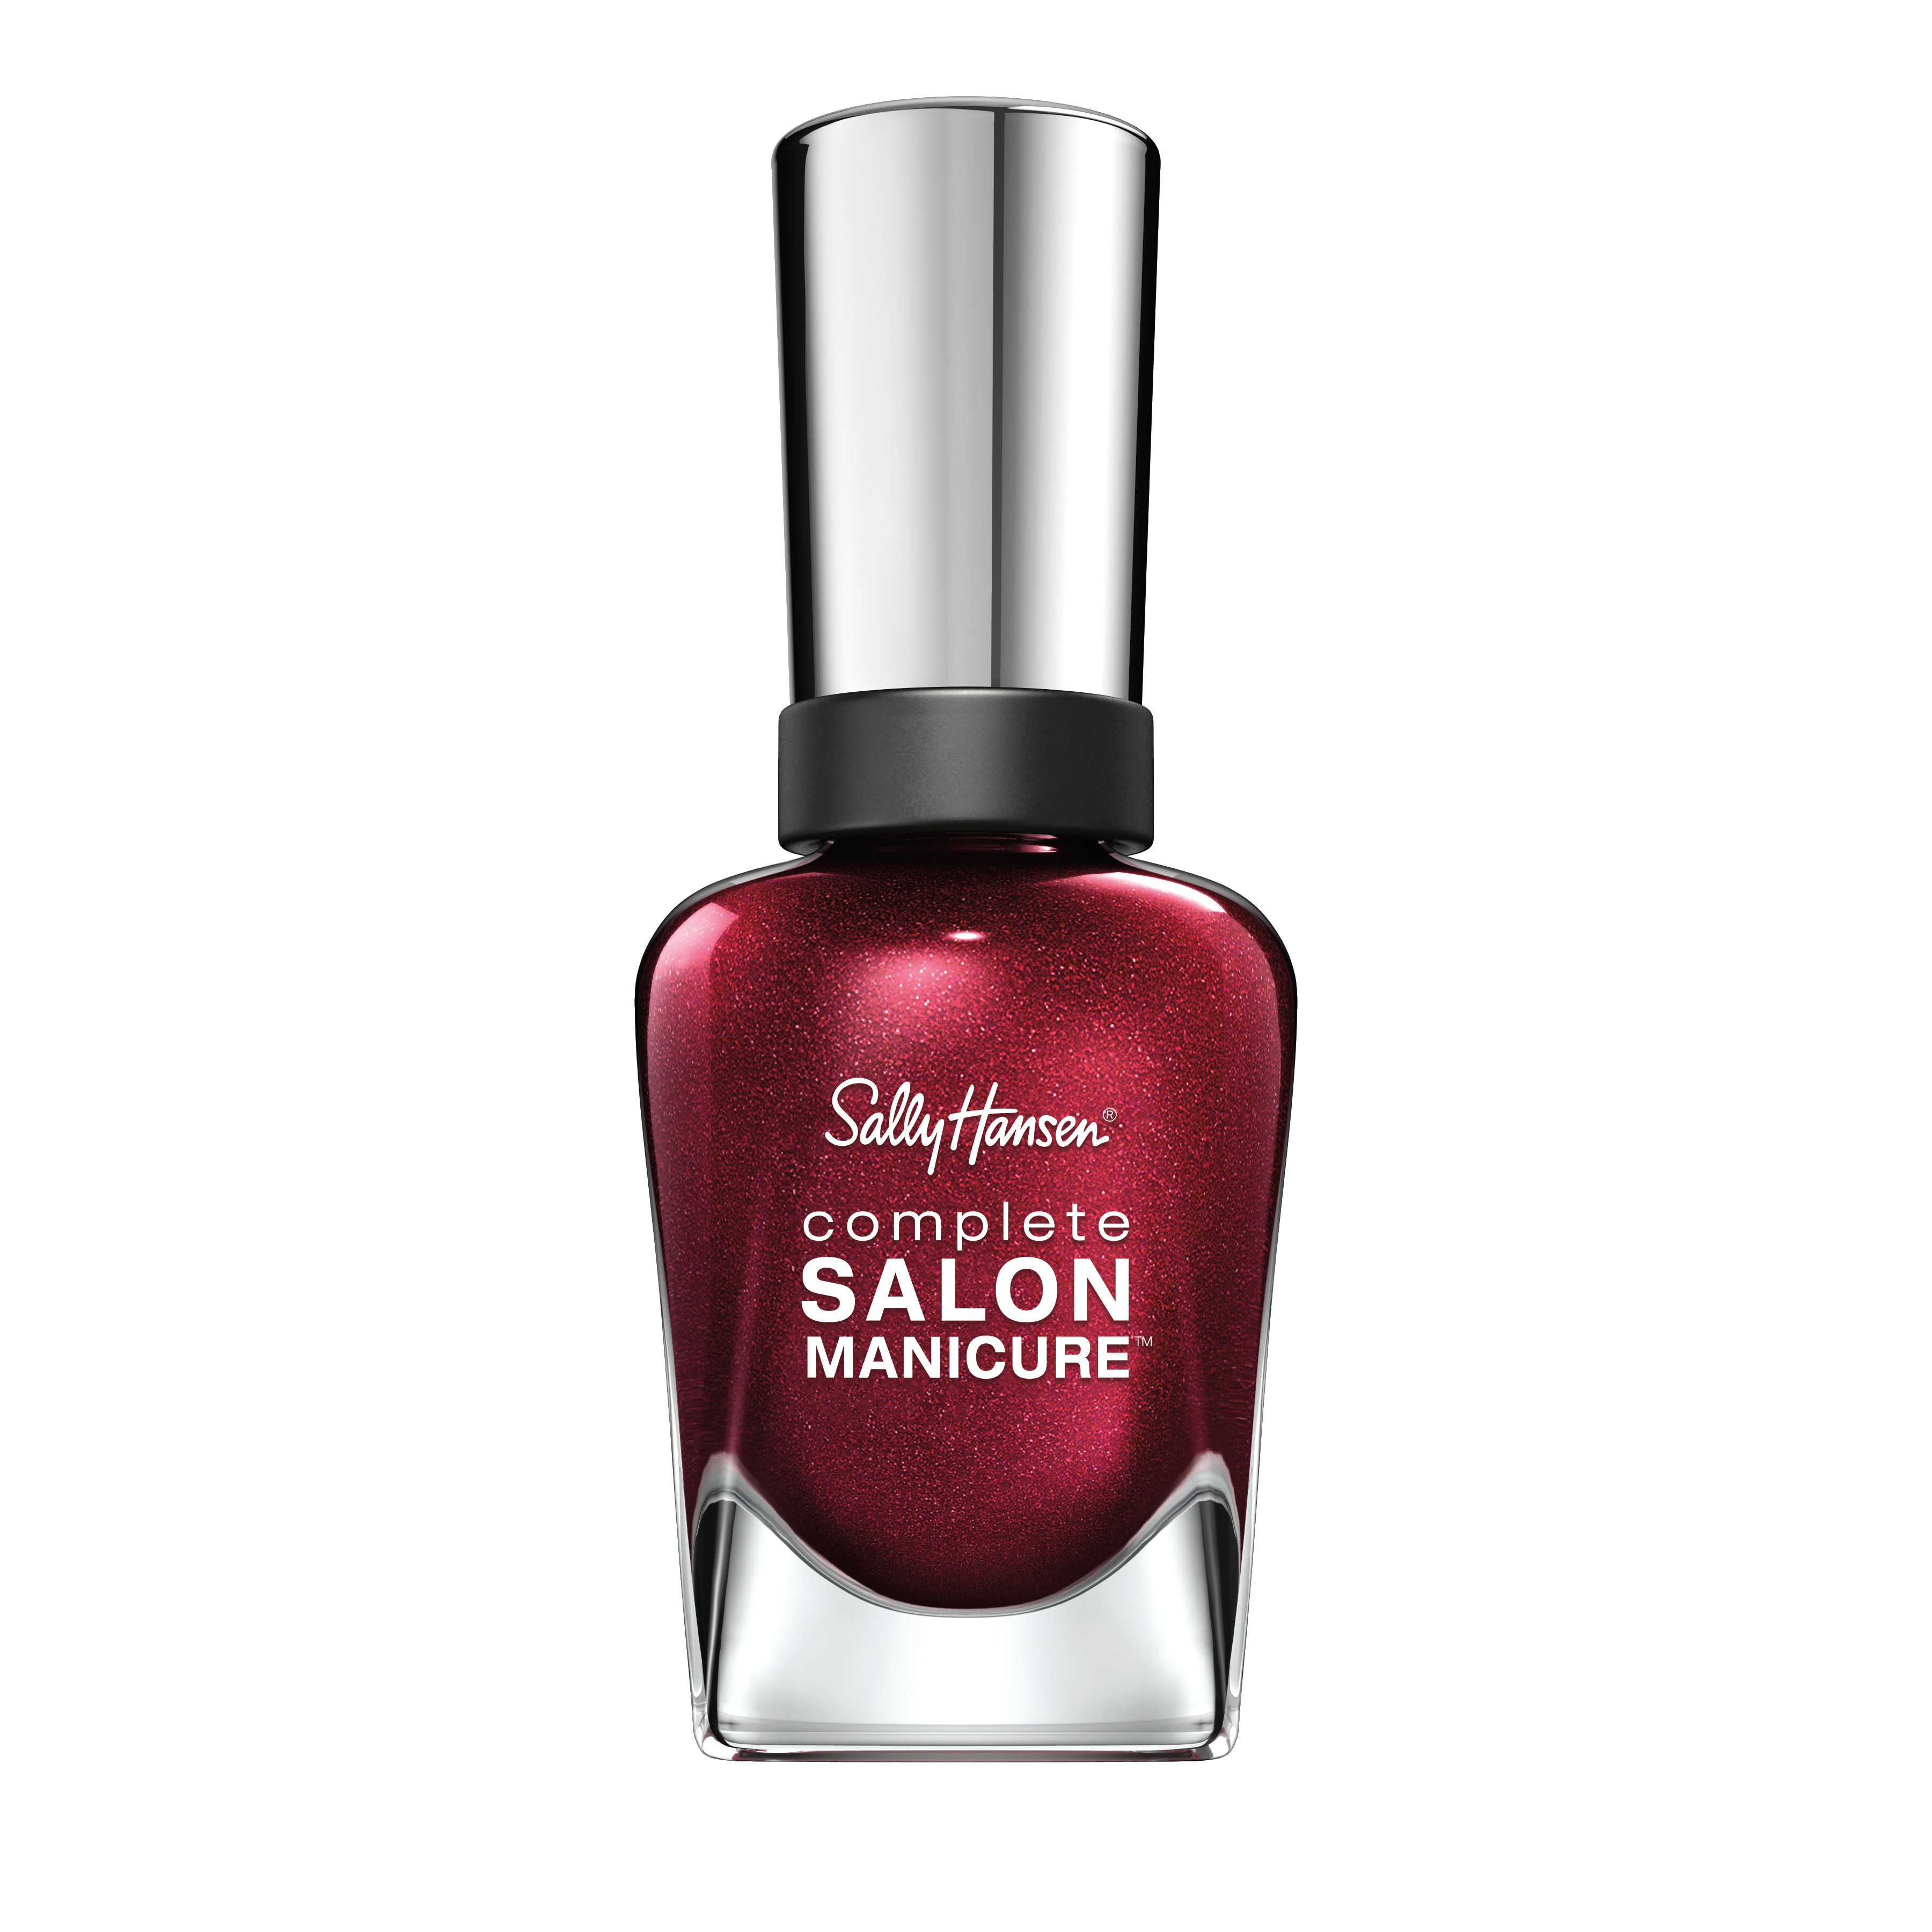 Sally Hansen Complete Salon Manicure Nail Color, Wine Not - image 1 of 8